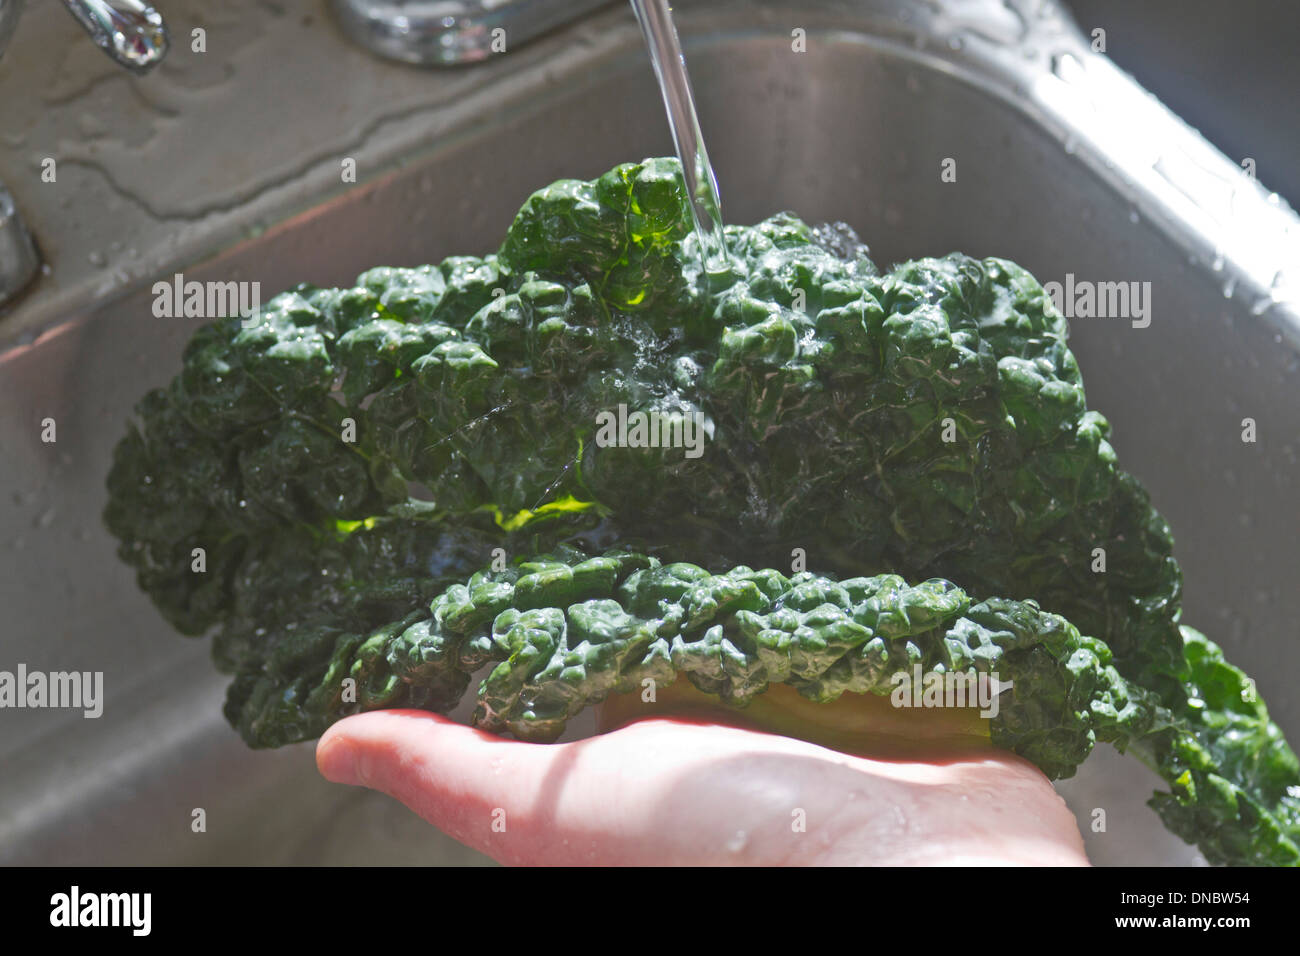 A hand washing a kale leaf in a kitchen sink Stock Photo